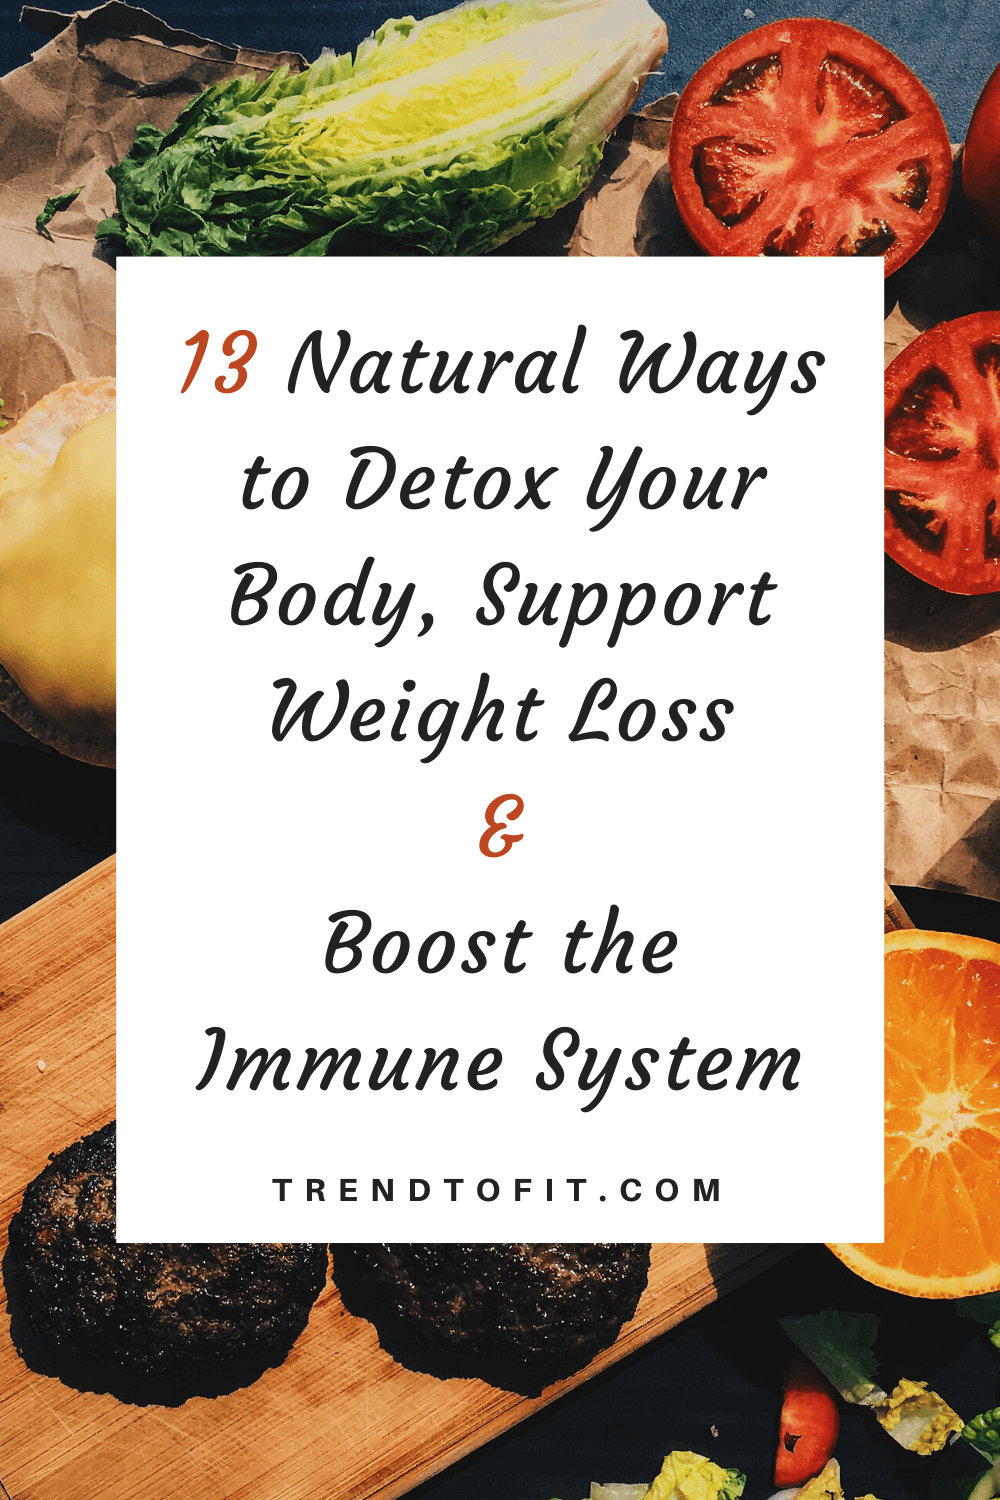 How to detox your body to lose weight naturally